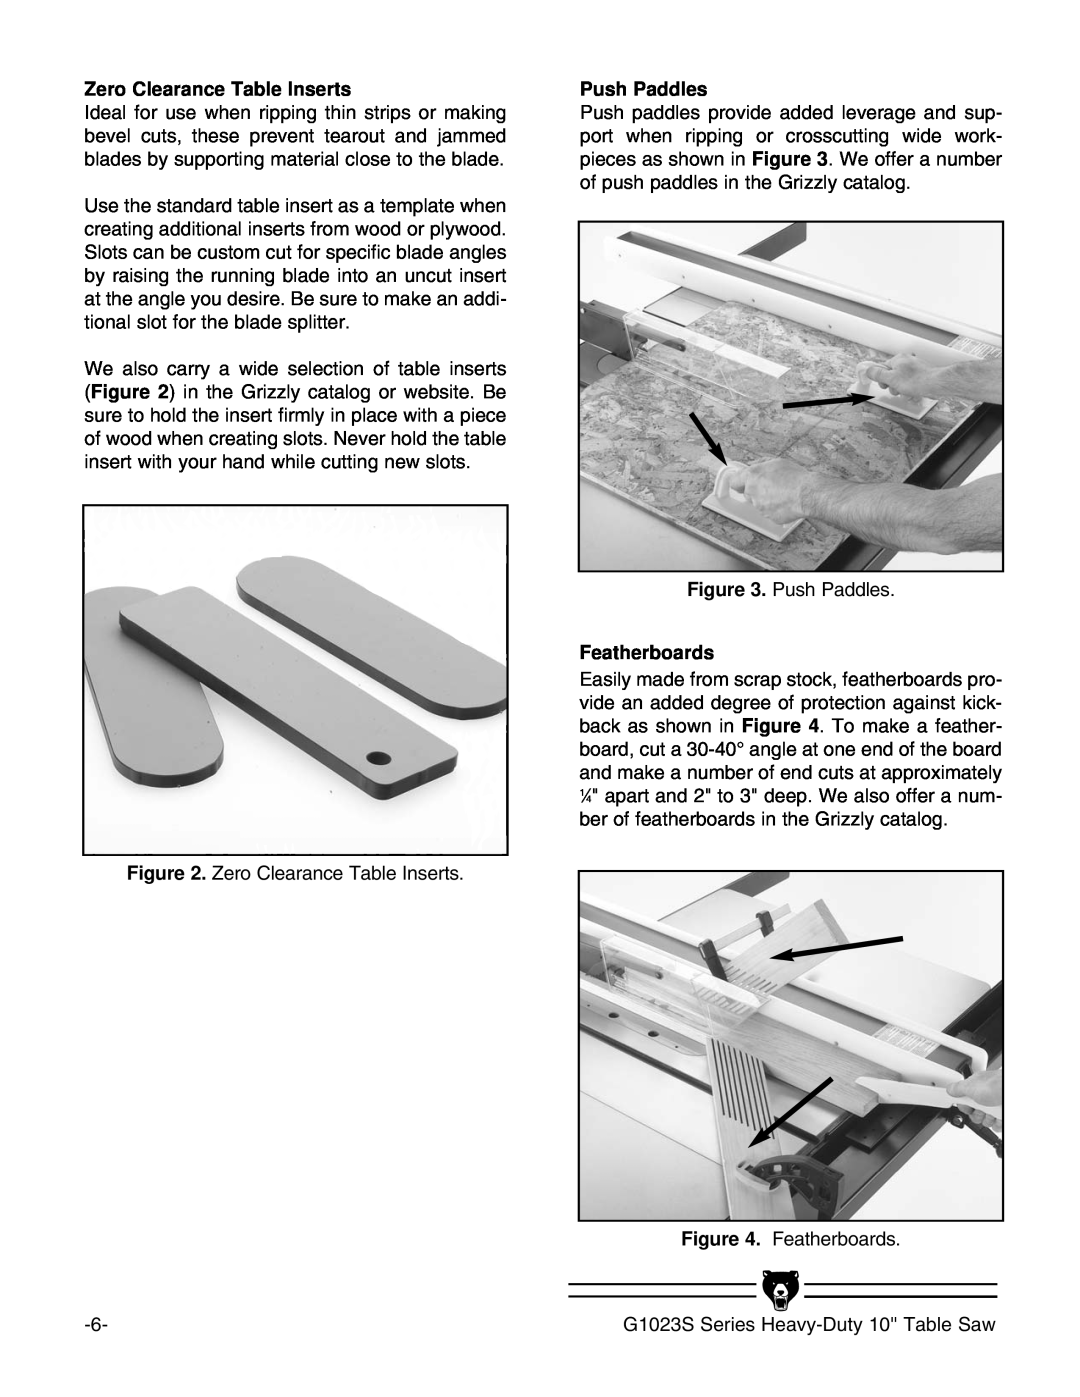 Grizzly MODEL instruction manual Zero Clearance Table Inserts, Push Paddles, Featherboards 